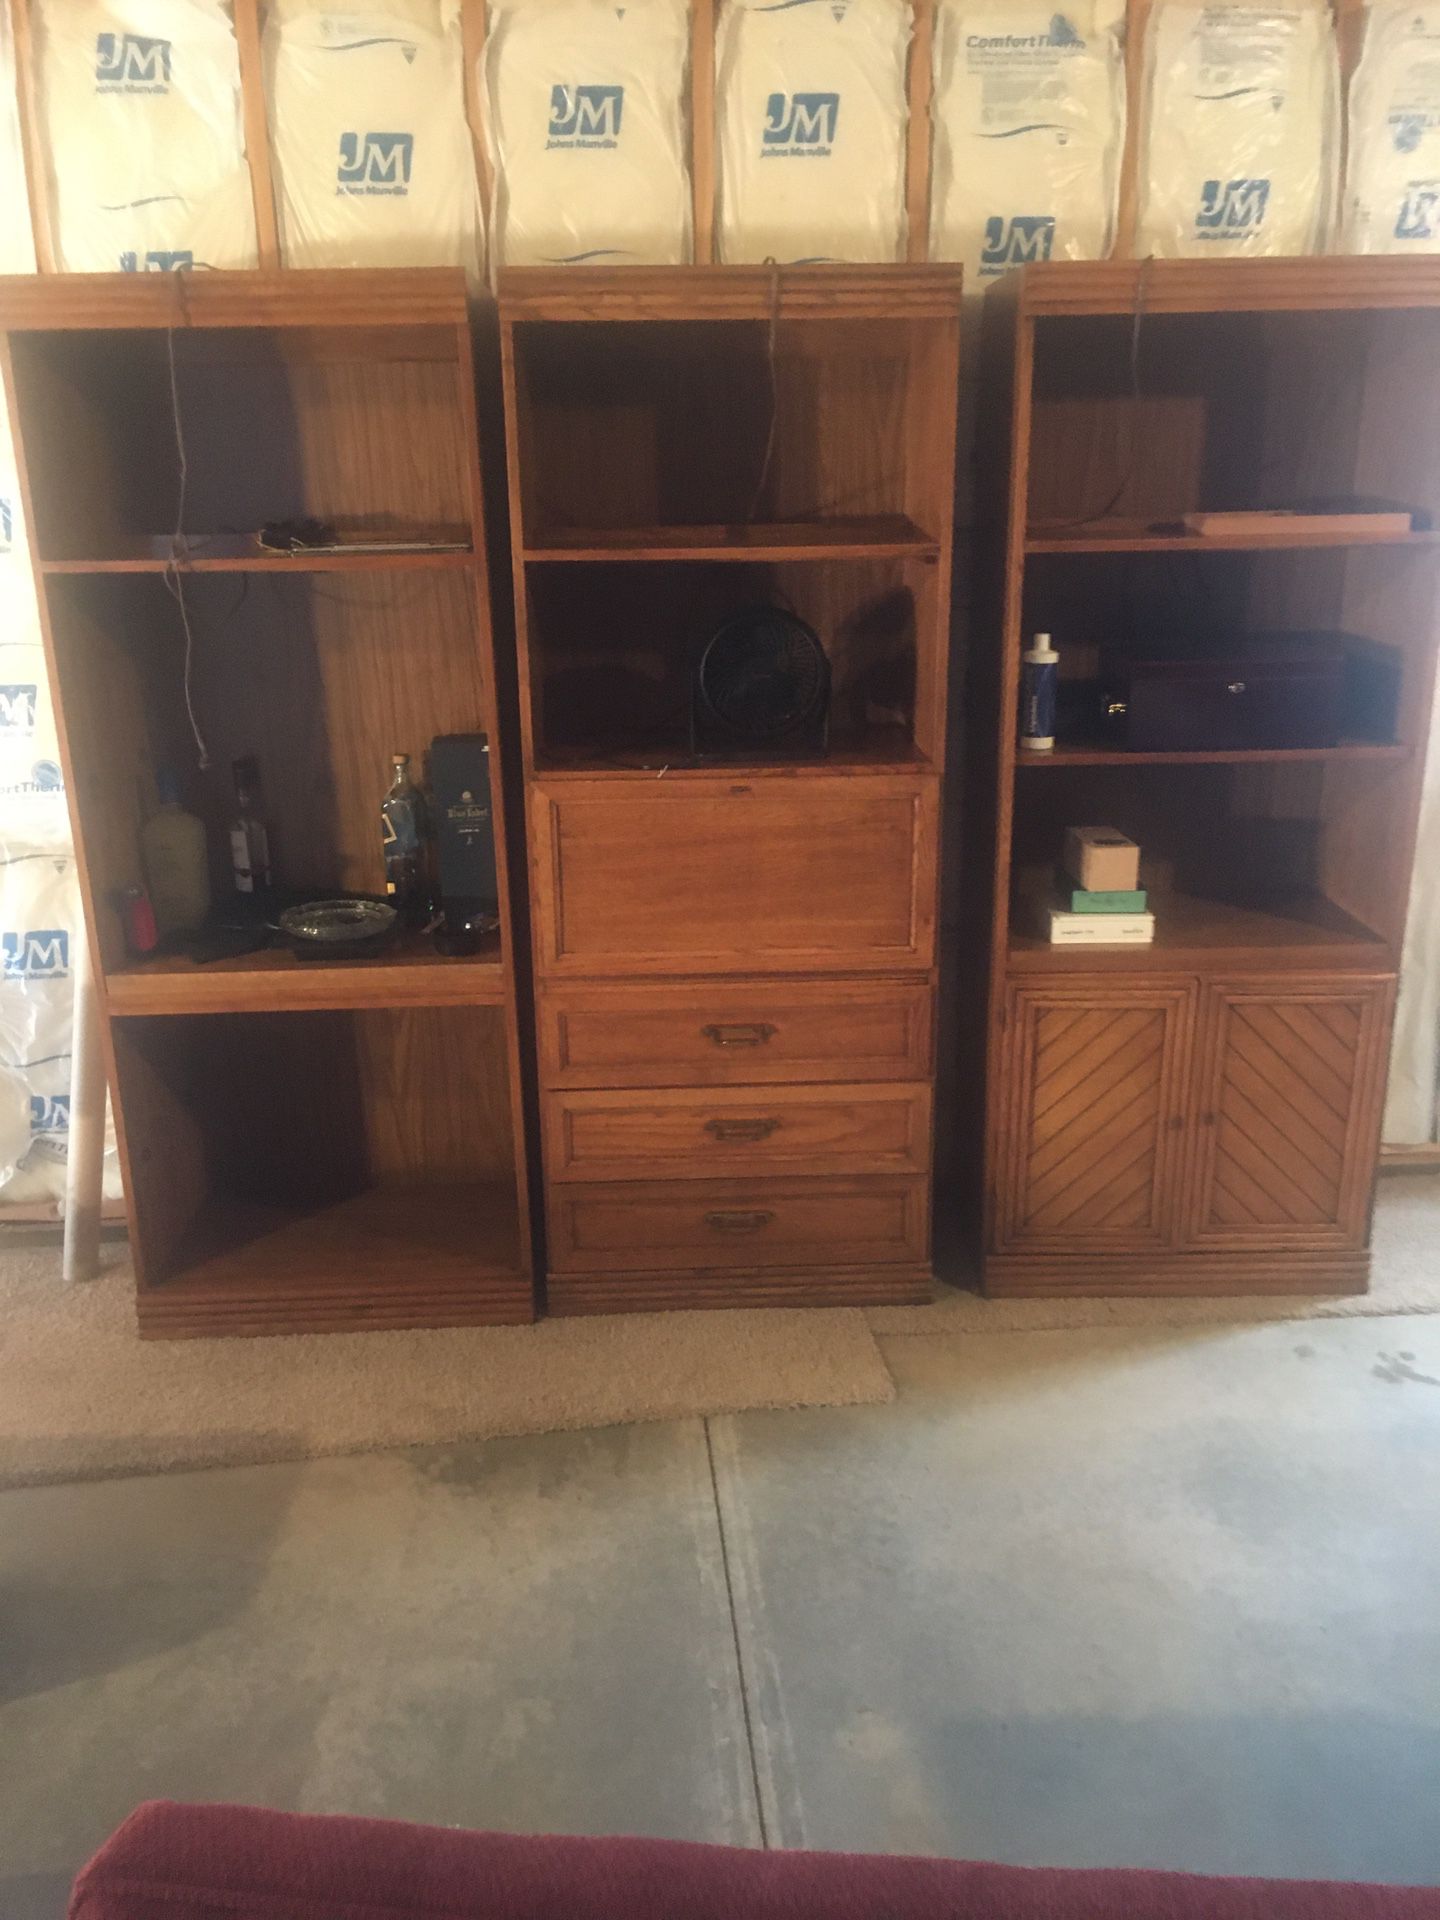 Three wall units with built-in lights -$30 for all three